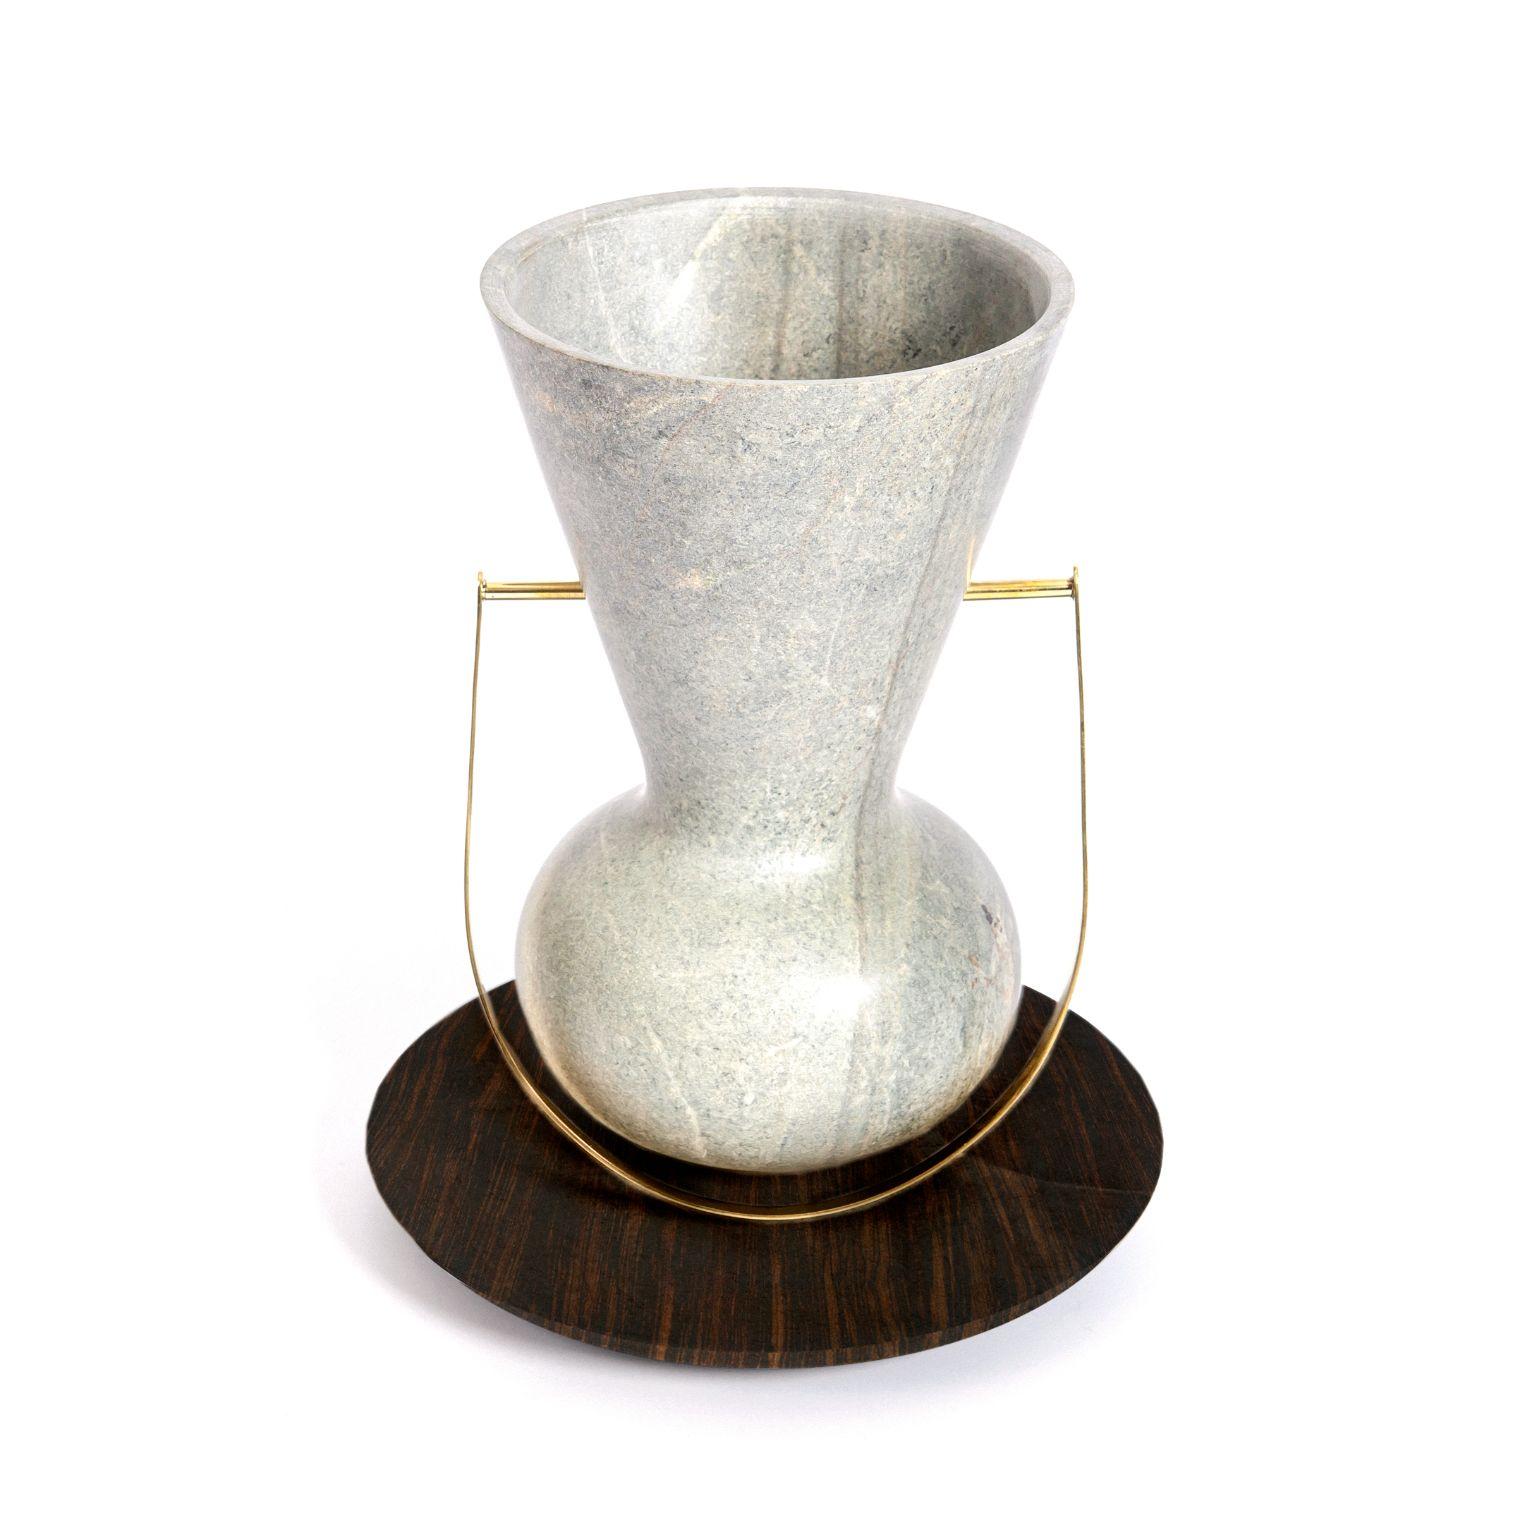 Ita 2 - soapstone vase by Alva Design
Materials: Soapstone, brass
Dimensions: 25 (Ø) x 32 (H)

Alva is a furniture and objects design office, formed by brothers Susana Bastos, artist and designer, and Marcelo Alvarenga, architect. Their projects are